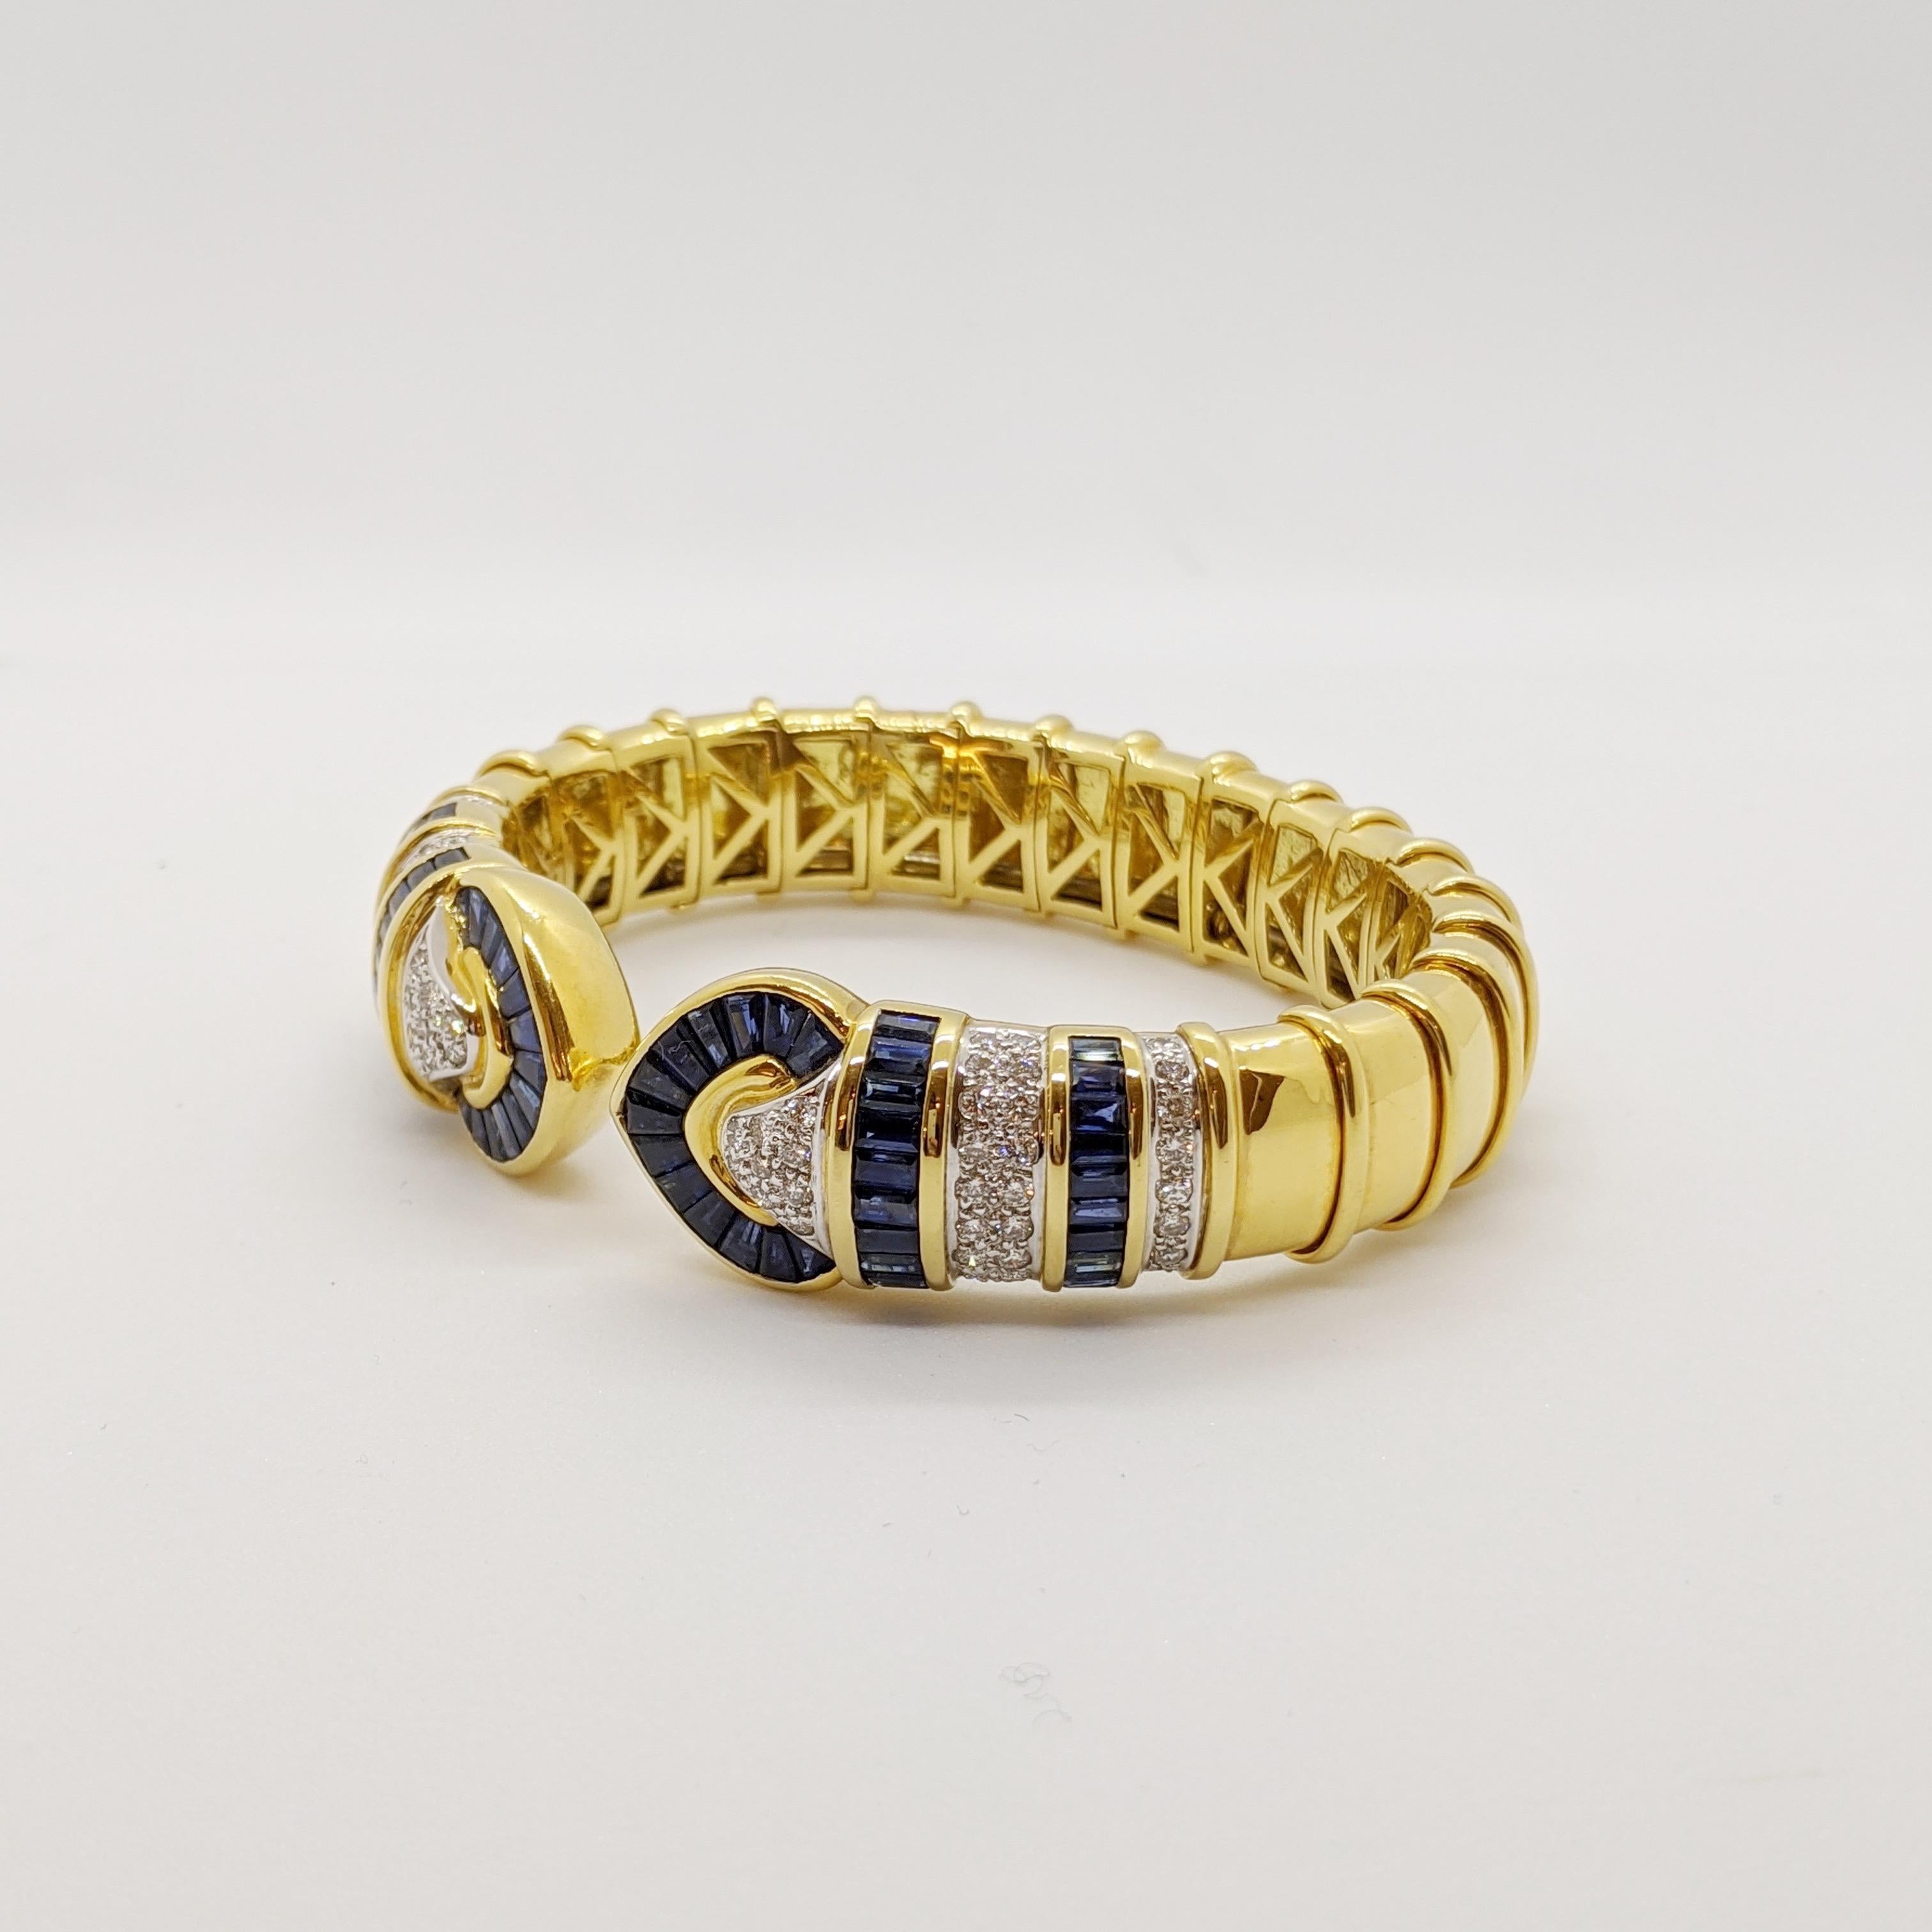 No details were spared in this beautiful 18 karat yellow gold cuff bracelet. Long tapered blue sapphires and pave round brilliant diamonds are set forming two hearts. The design continues with rows of baguette sapphires and pave diamonds. Ribbed